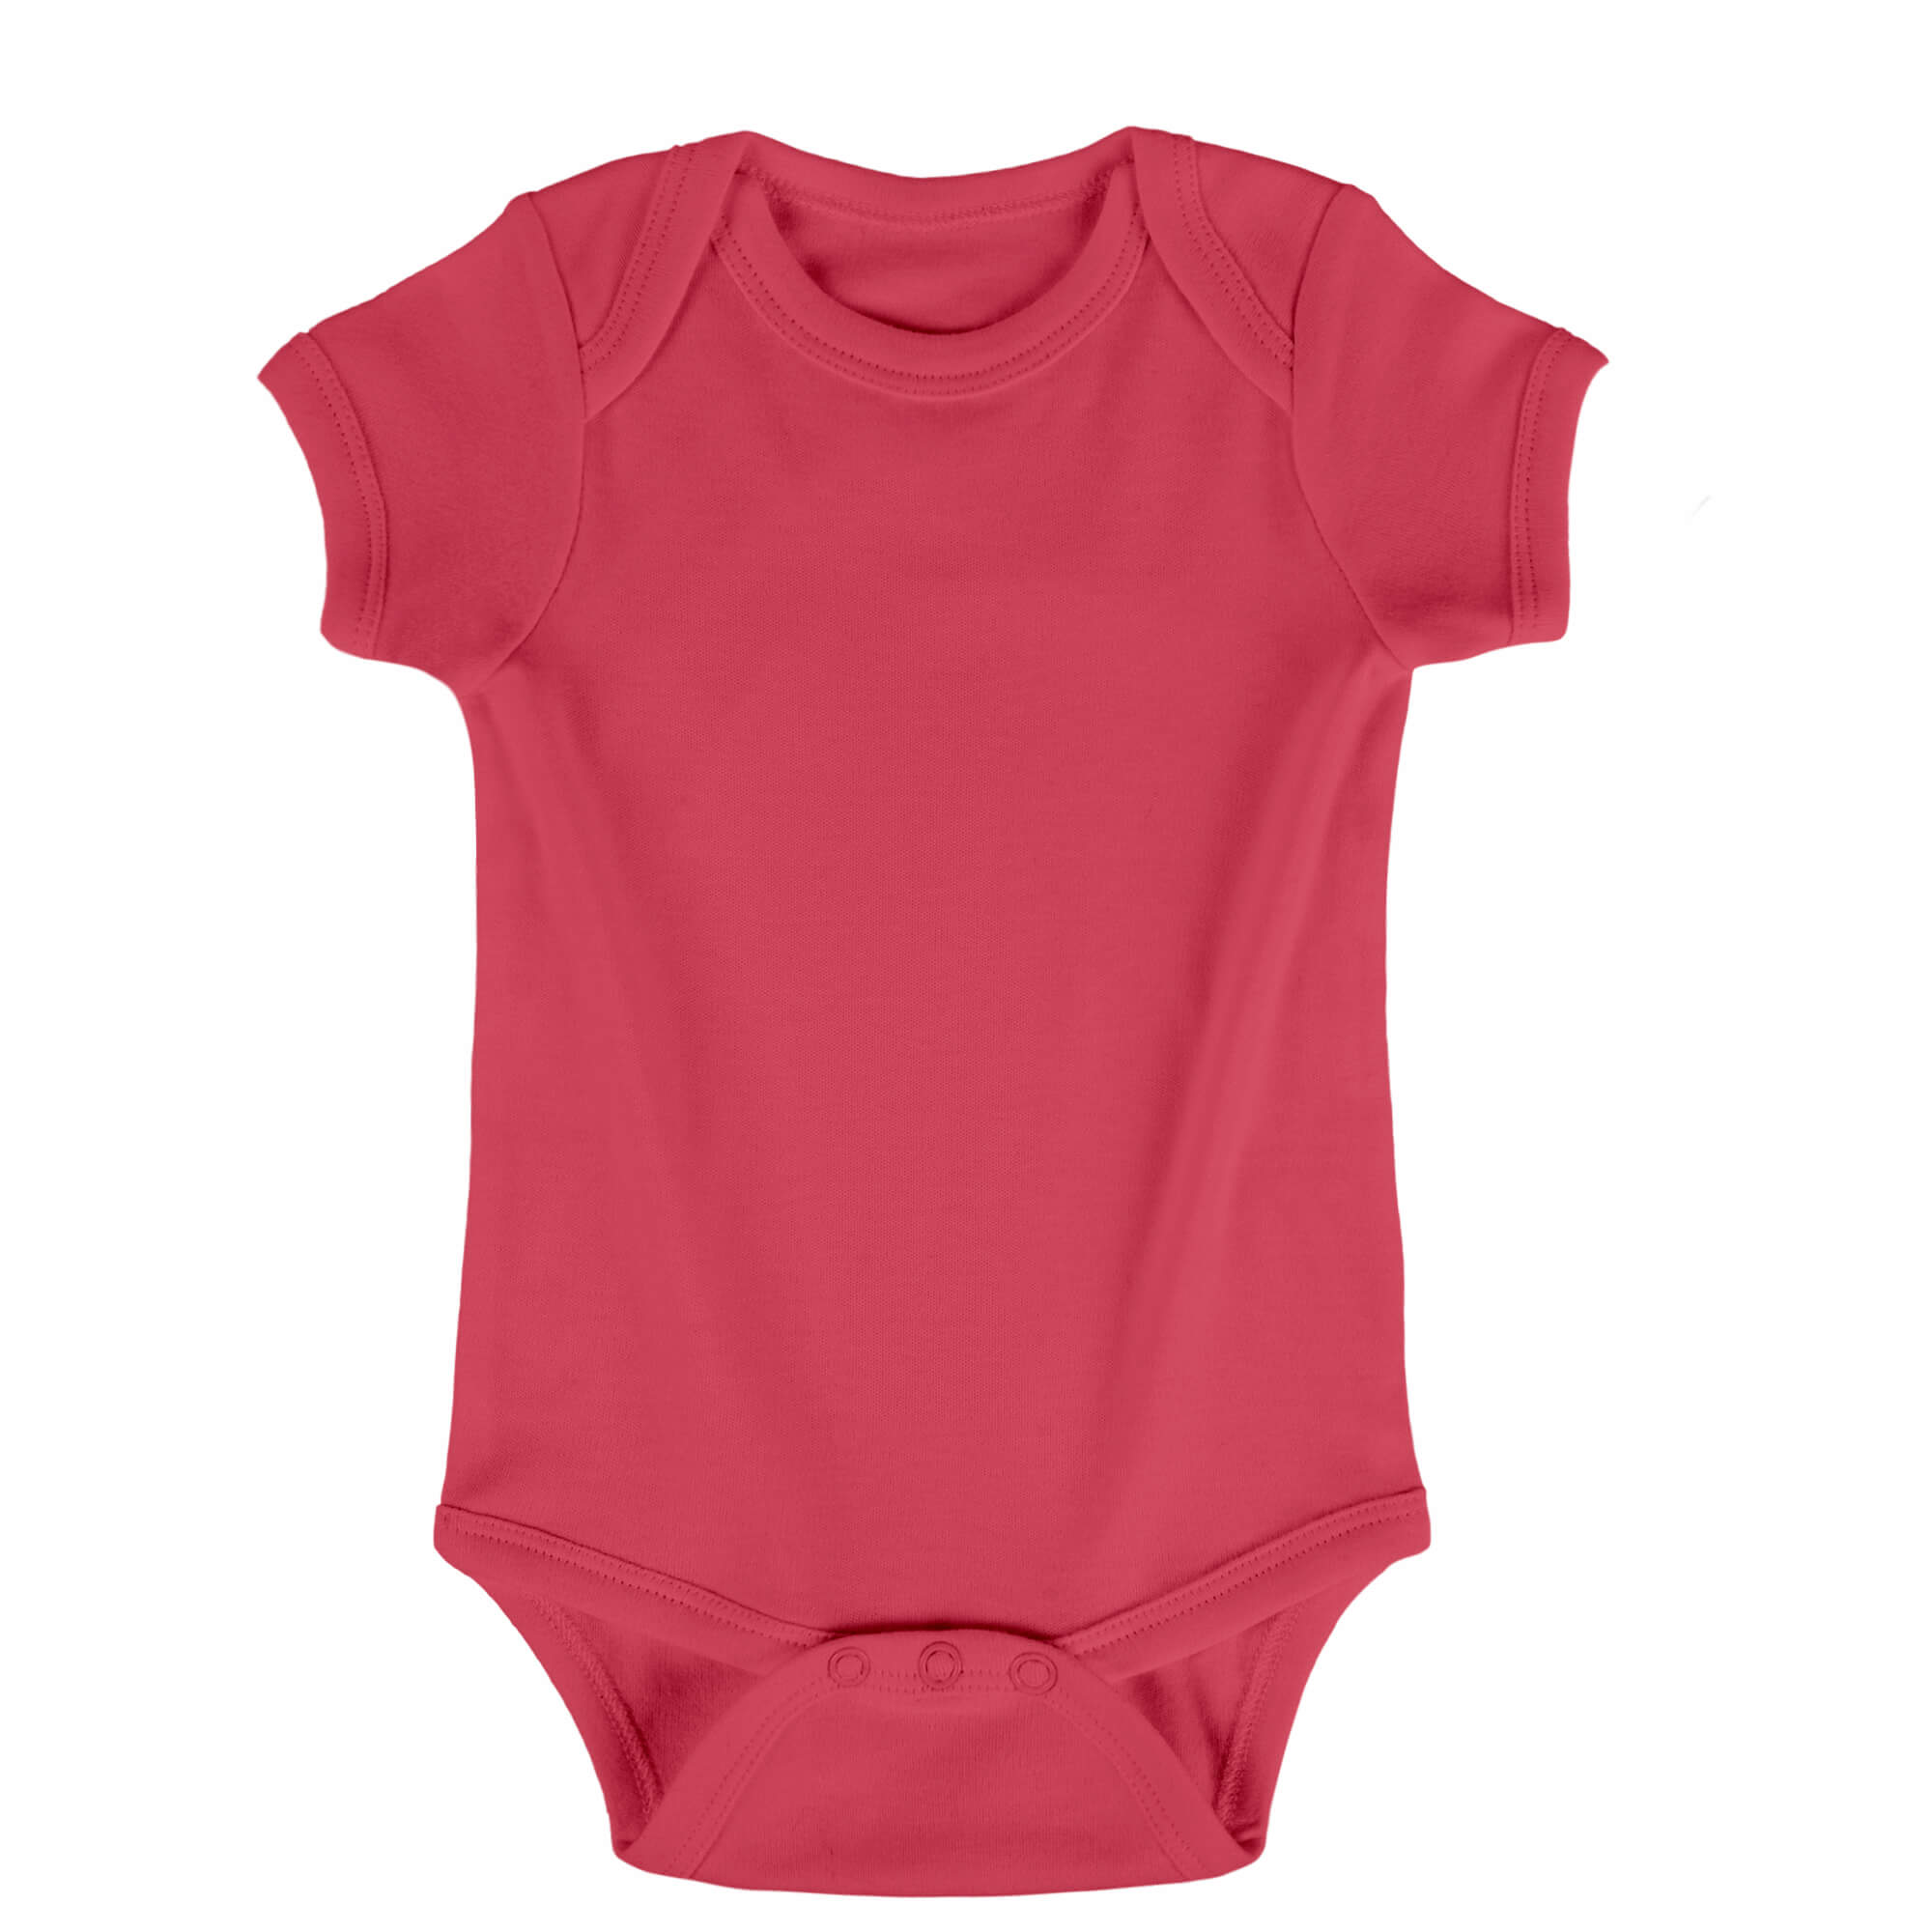 vermilion color number #45, onesie color selection, and color display.